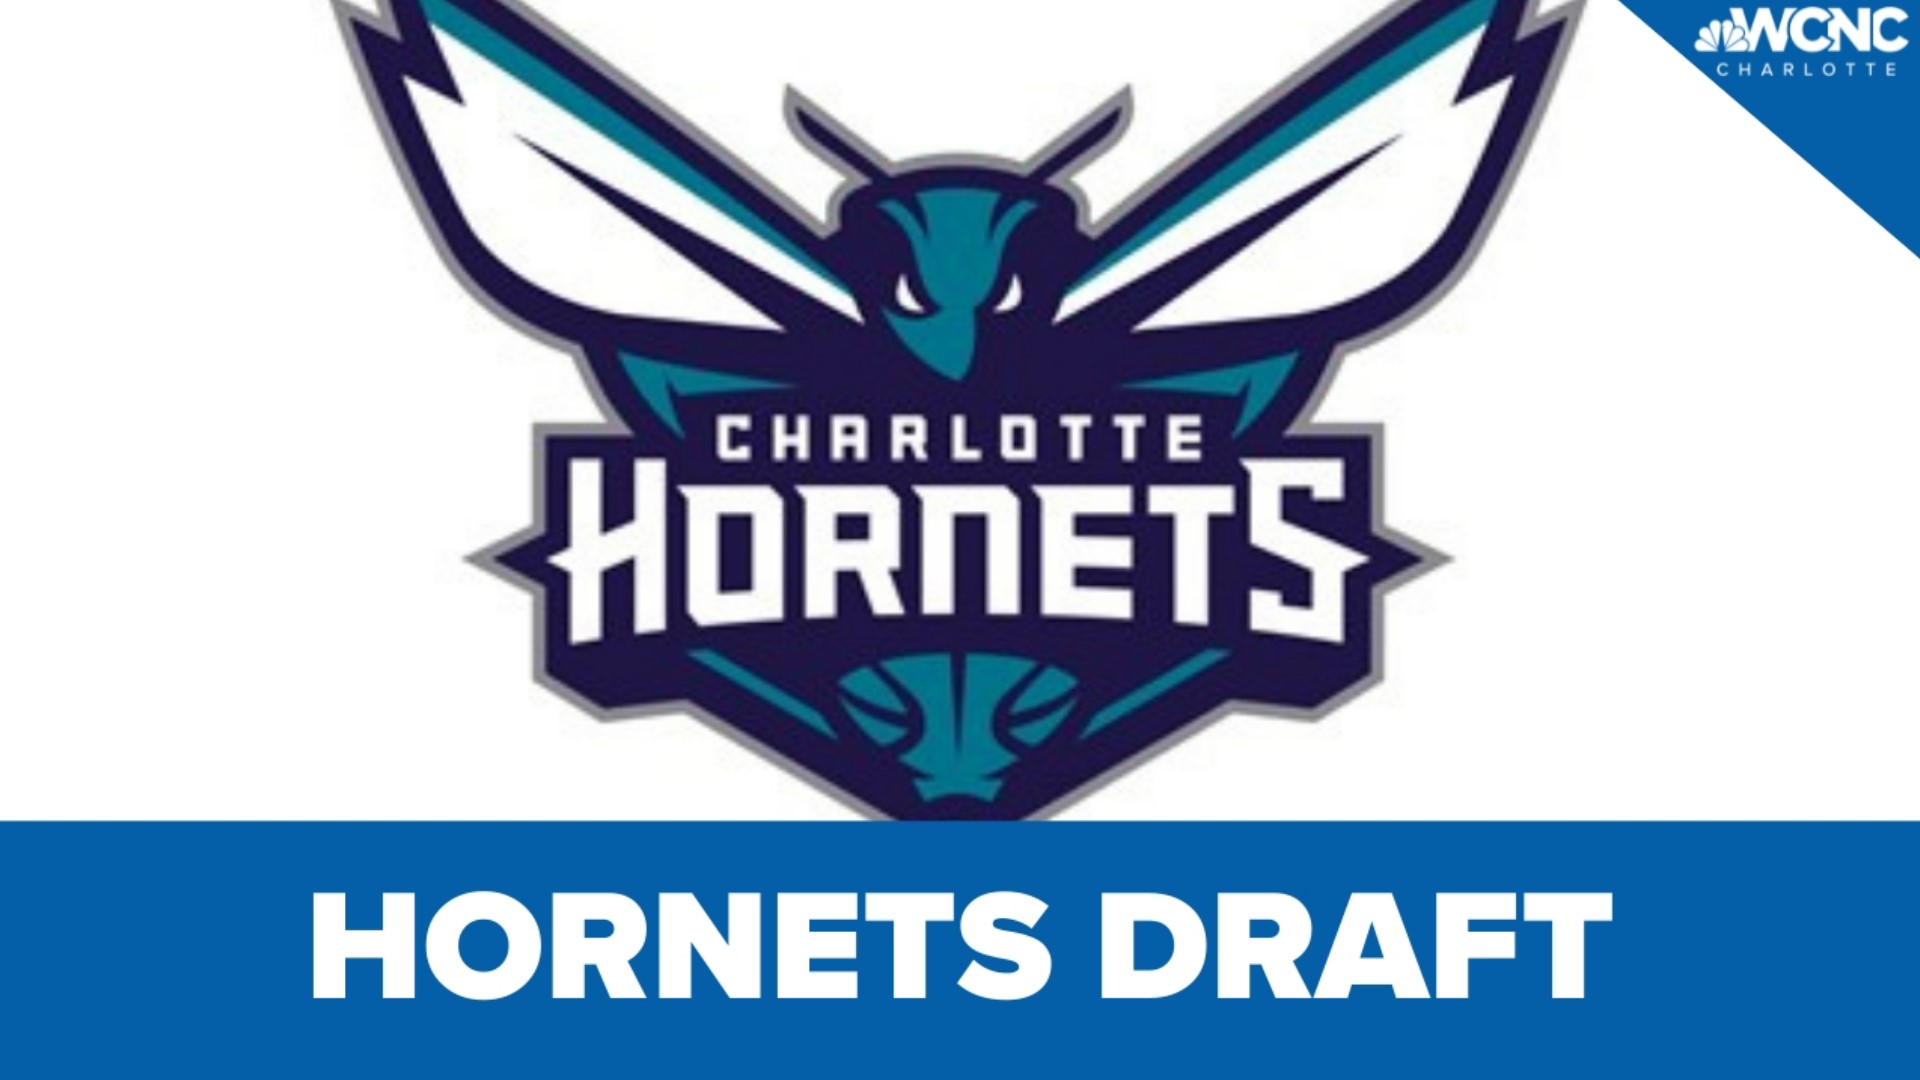 The Charlotte Hornets drafted two centers in the first round of the NBA draft — trading one and keeping the other.